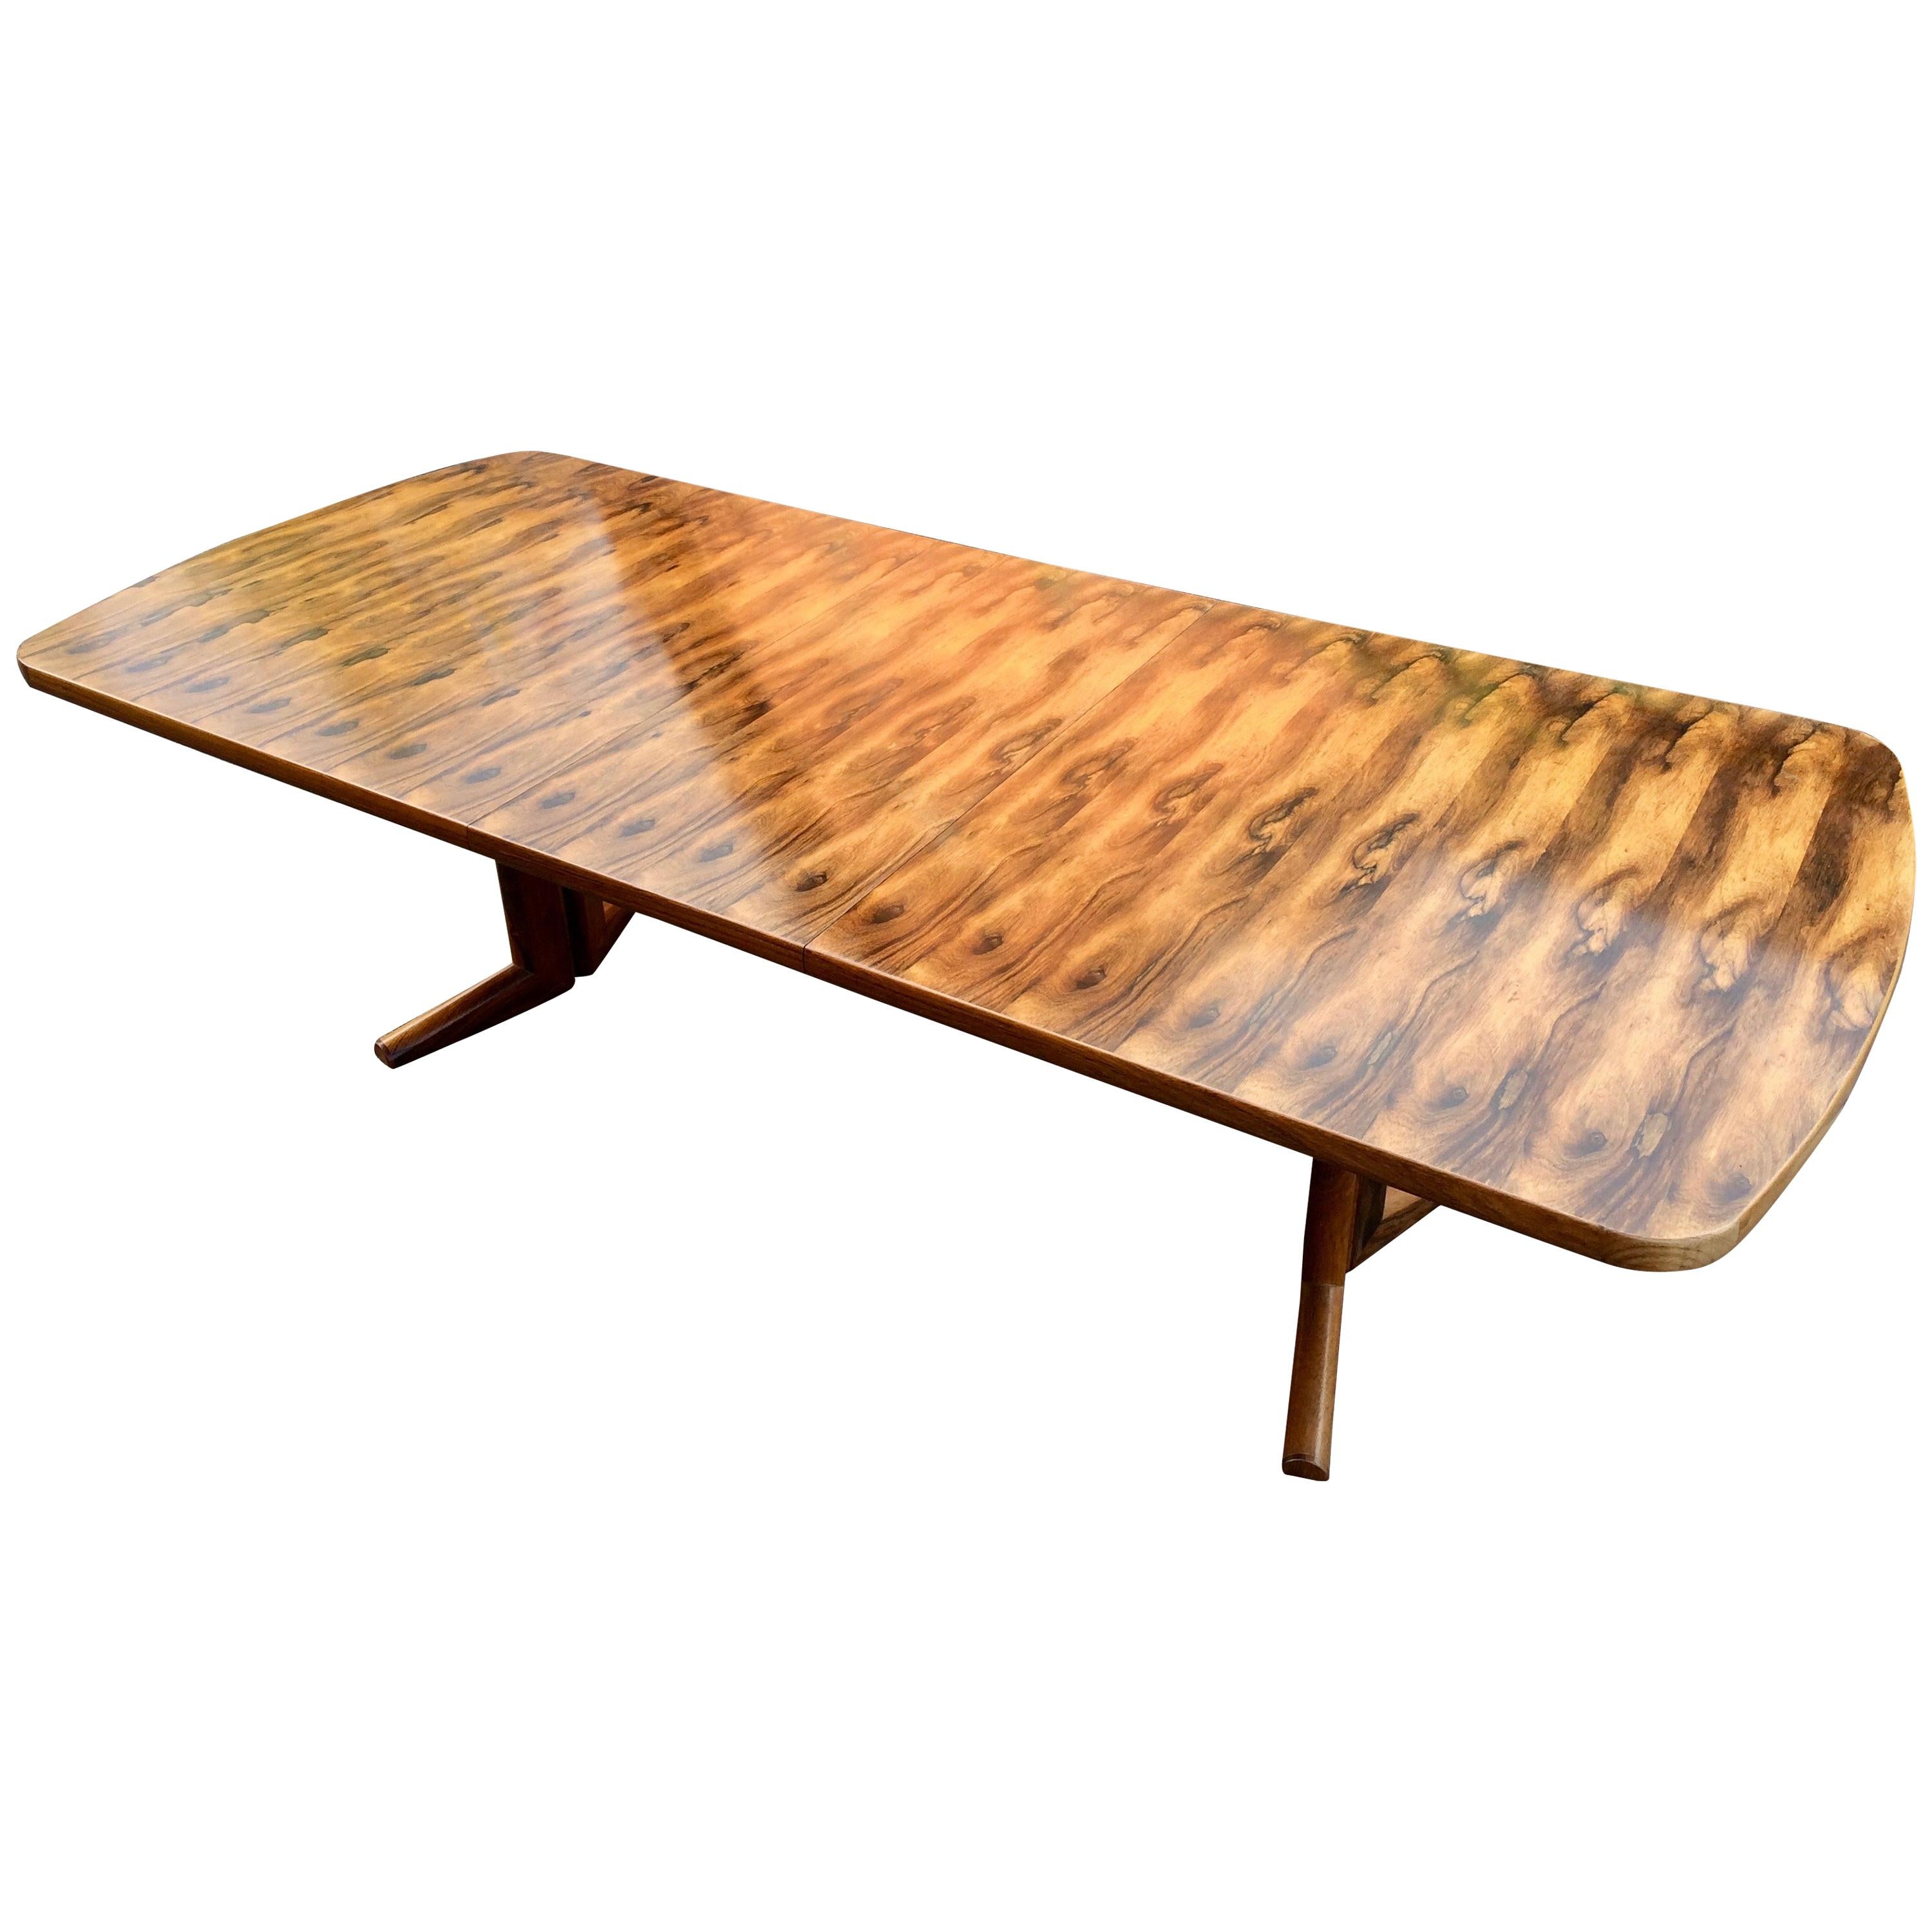 Sublime Gordon Russell 'The Marwood Range' extending dining / boardroom table designed by Martin Hall for Gordon Russell Ltd of Broadway, Material: Figured rosewood - Date: 1970s This table forms part of a suite which we are also selling comprising